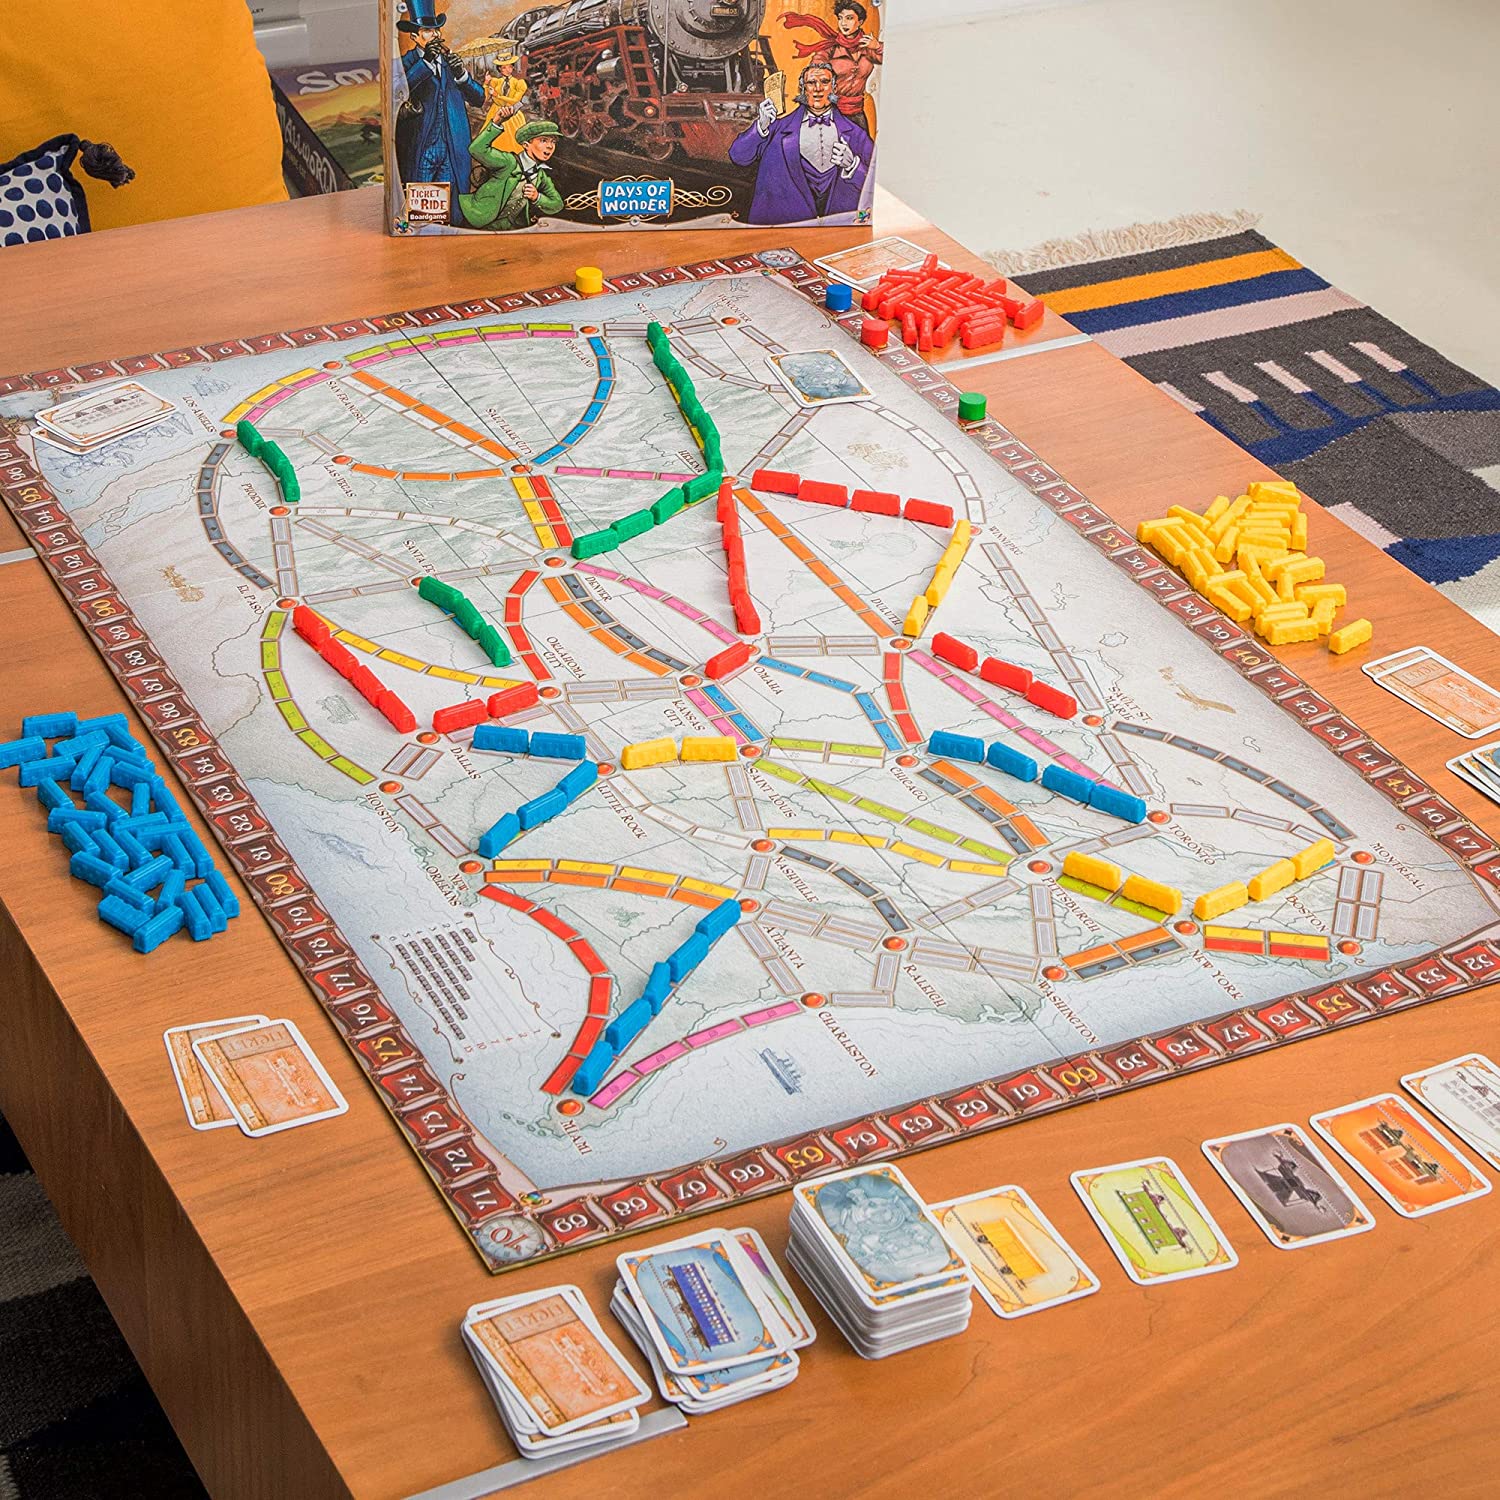 Find out about Ticket to Ride